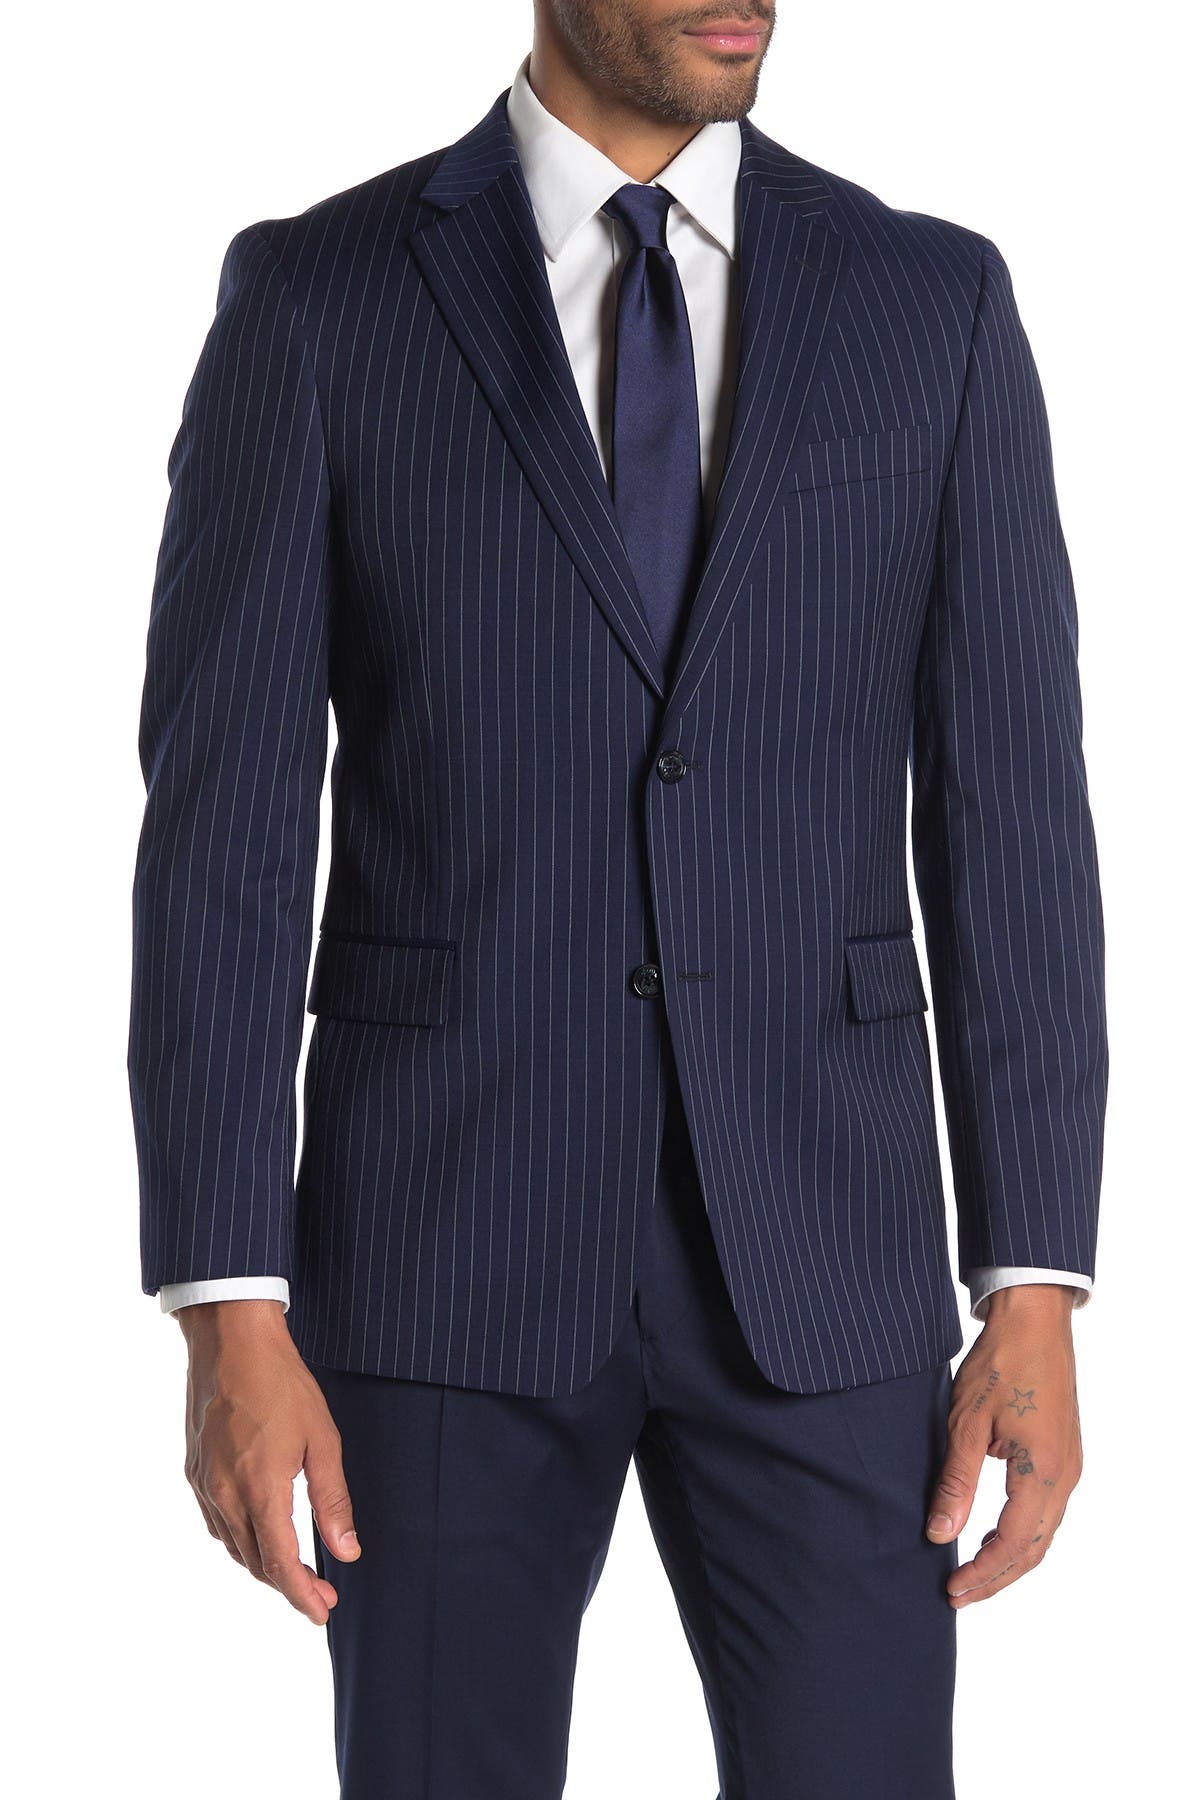 tommy hilfiger suits review